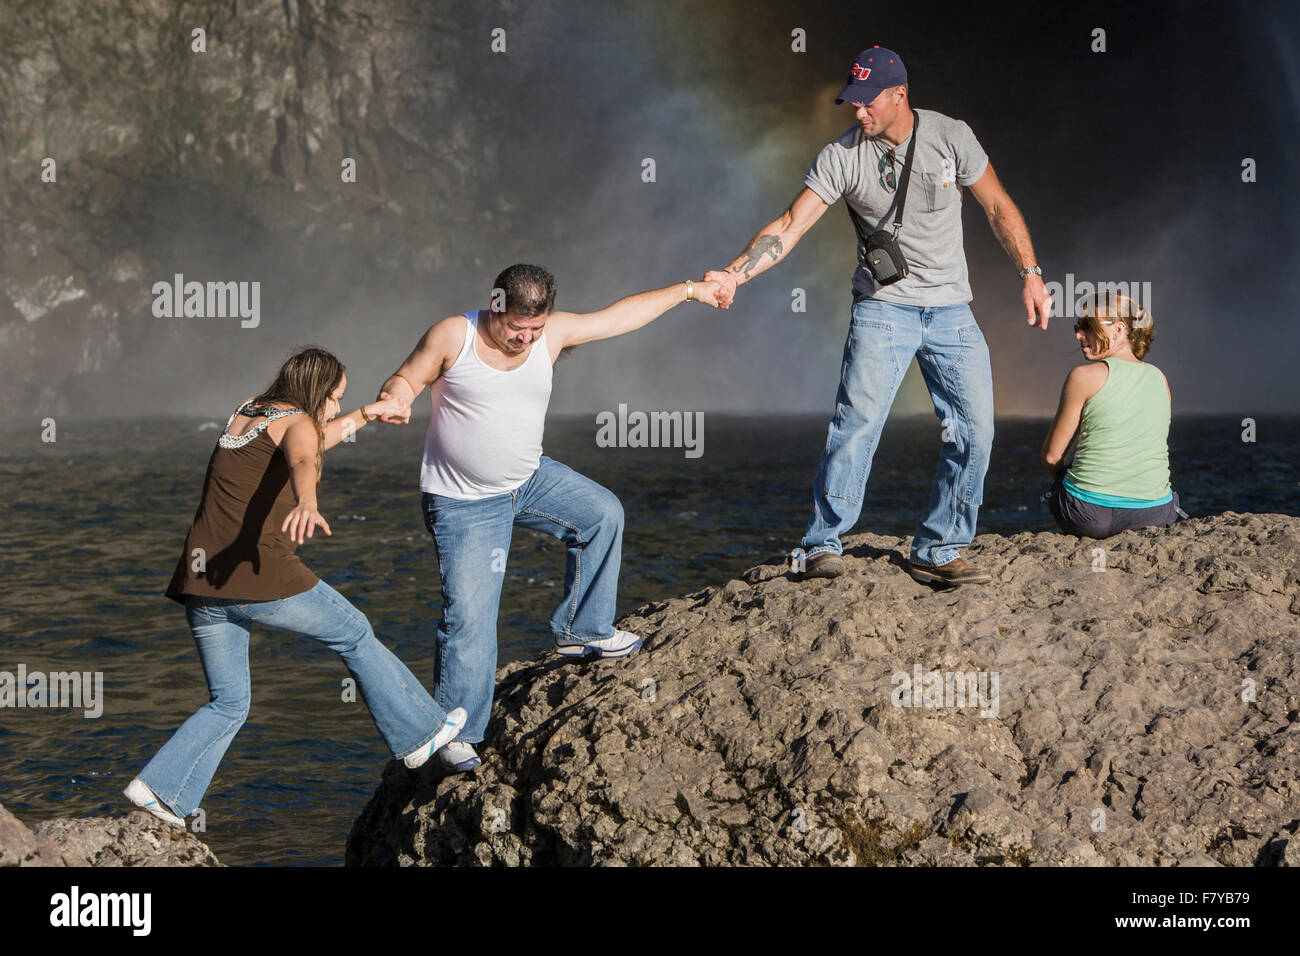 People helping people, Snoqualmie Falls, King County, Washington, United States Stock Photo